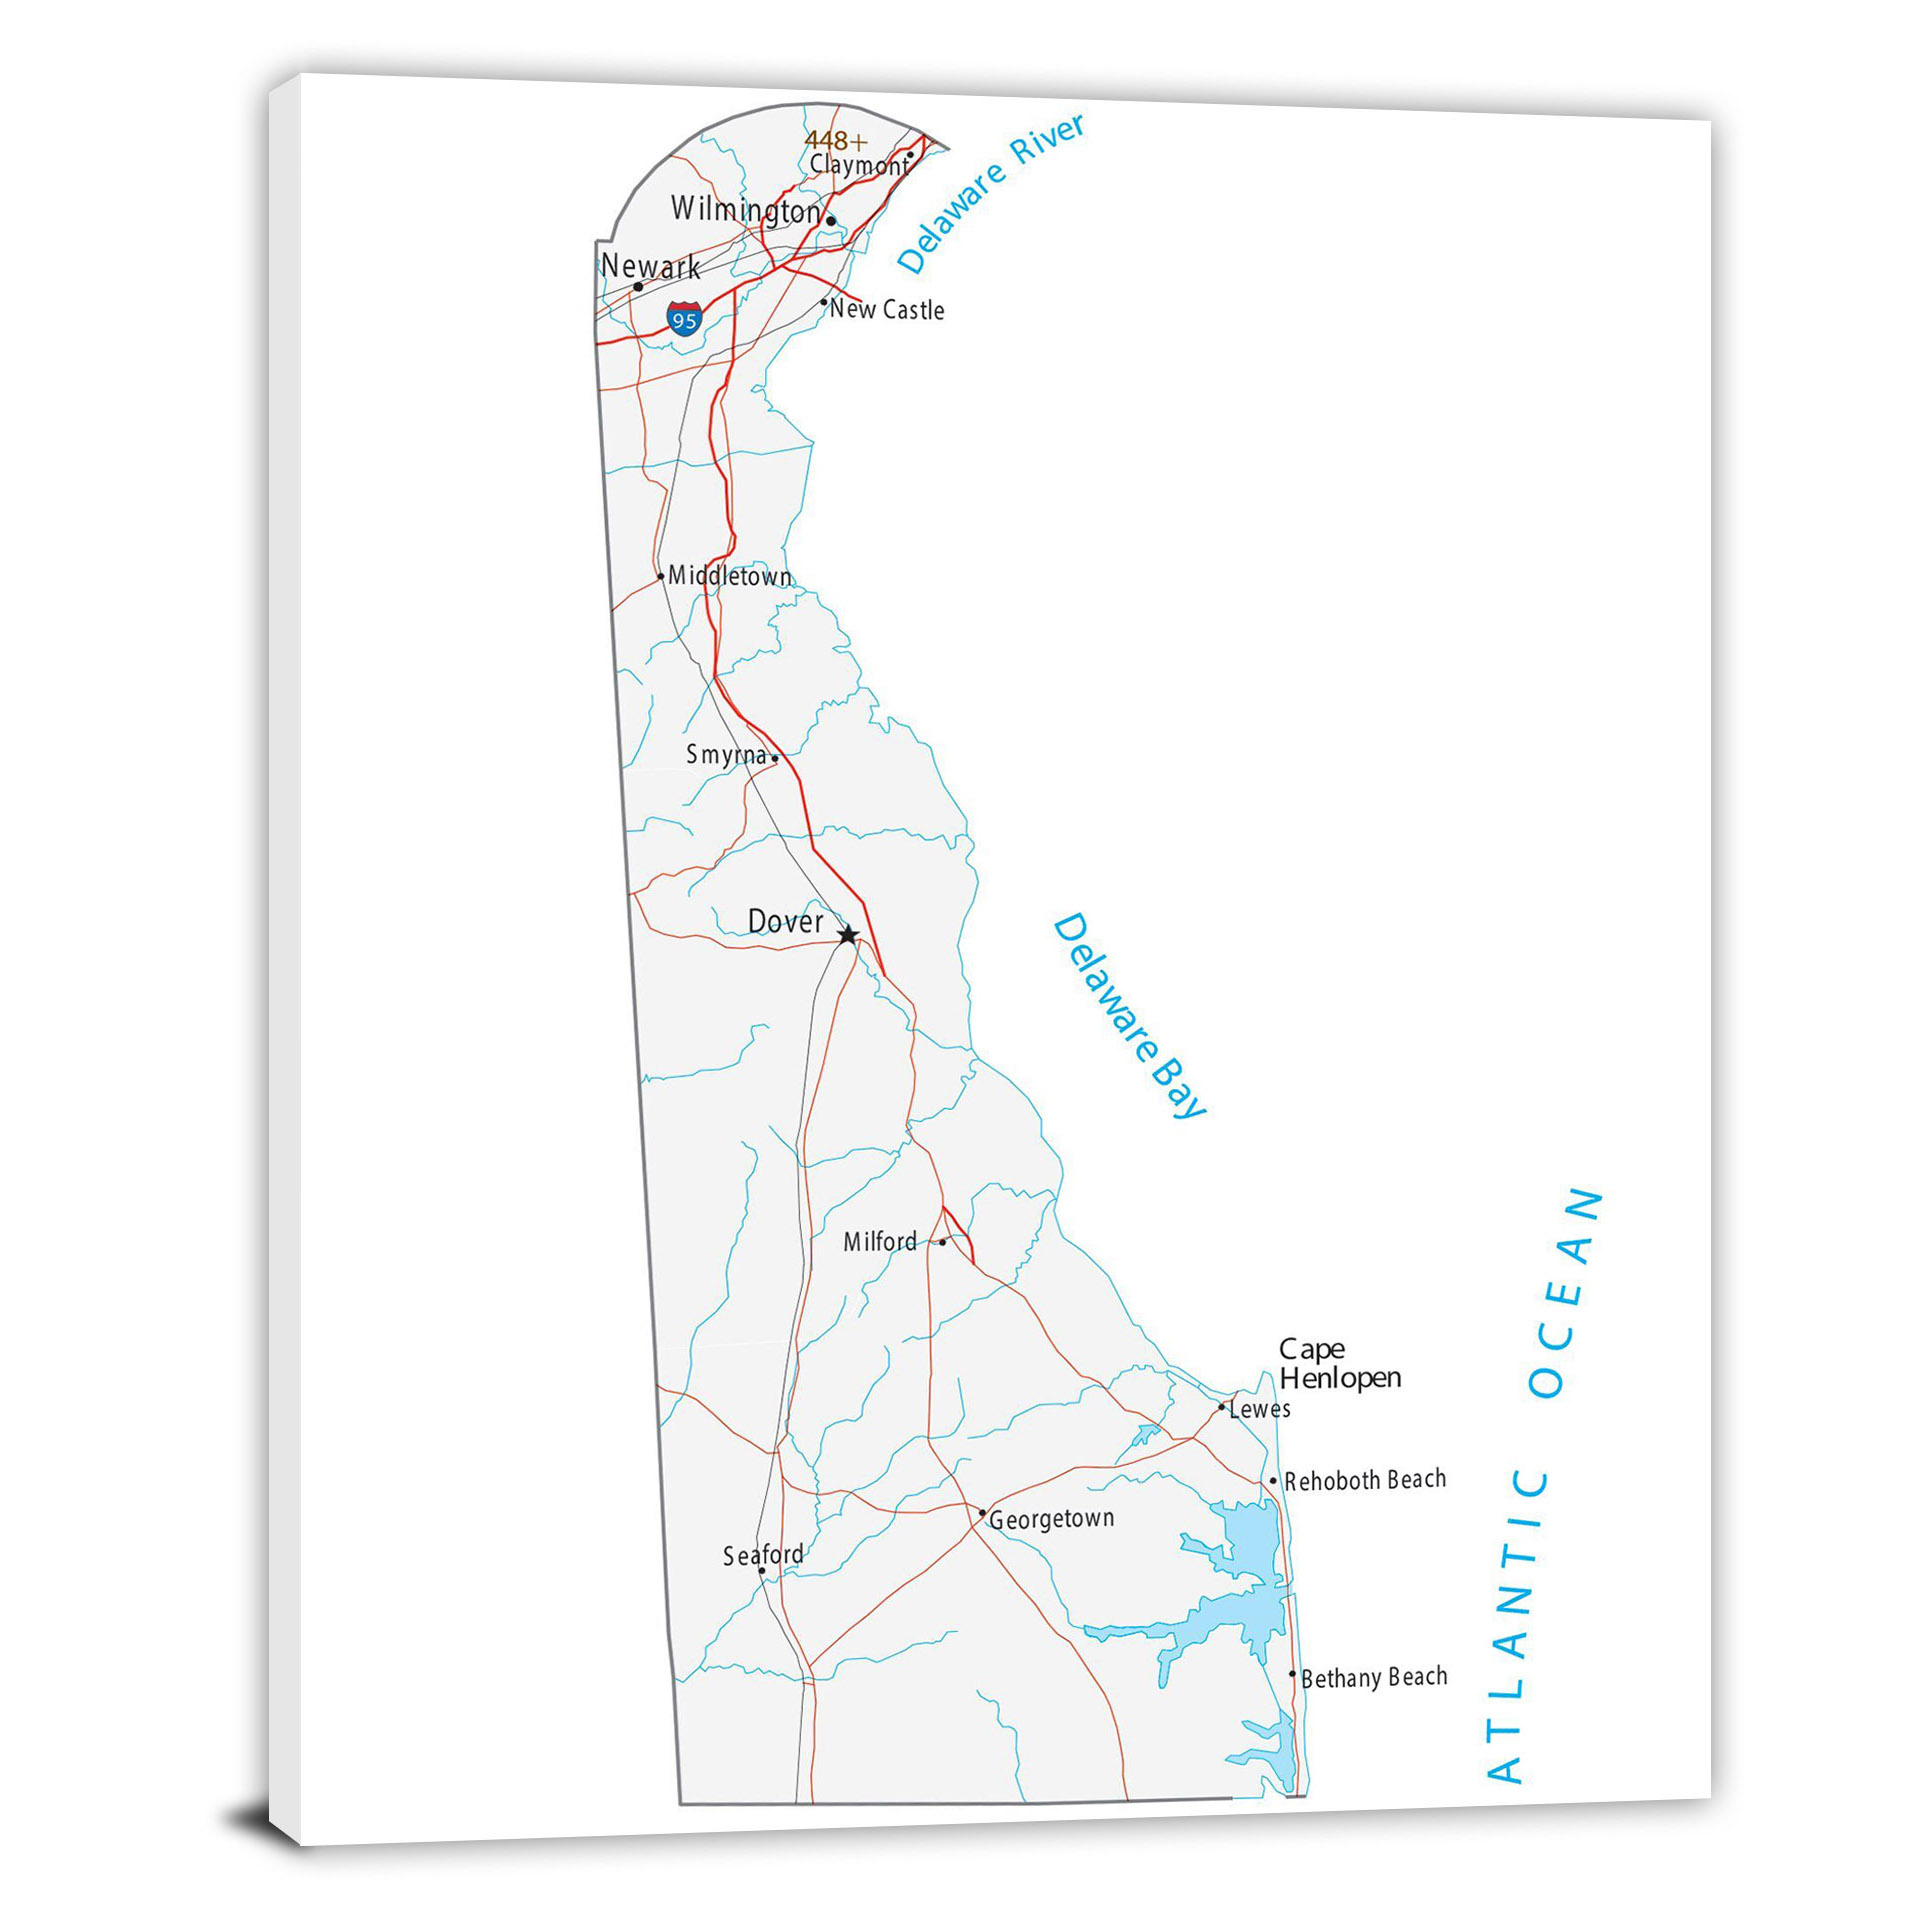 CWA585 Delaware Roads And Cities Map 00 